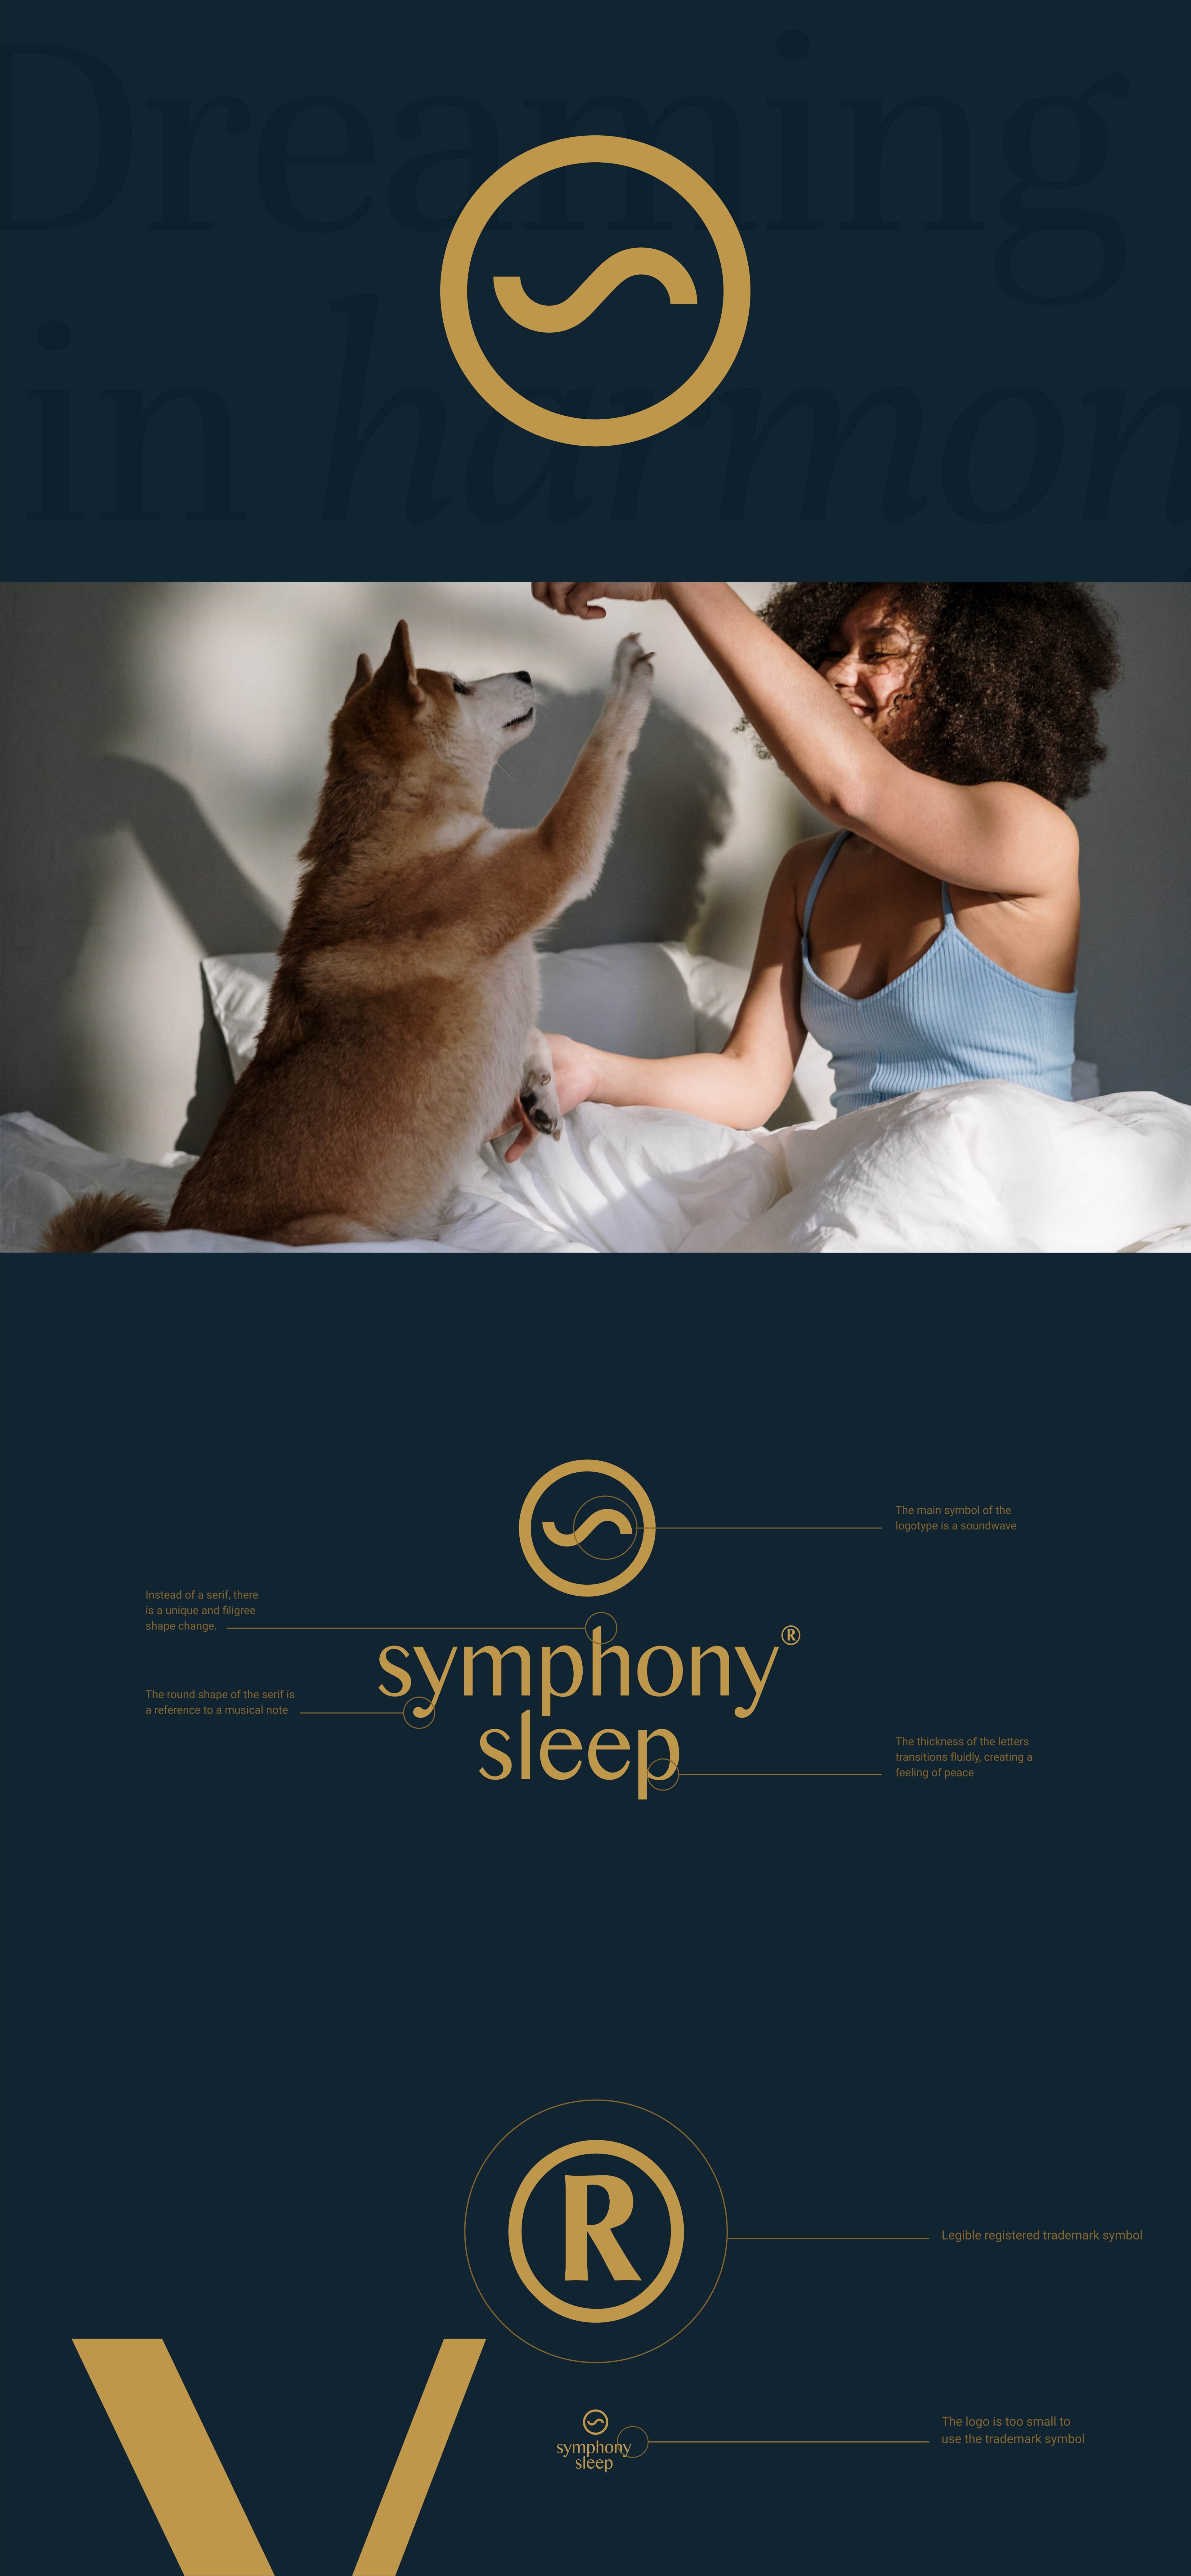 Big logo Sympfony Sleep. Disassembled logo. Picture of a girl with a dog